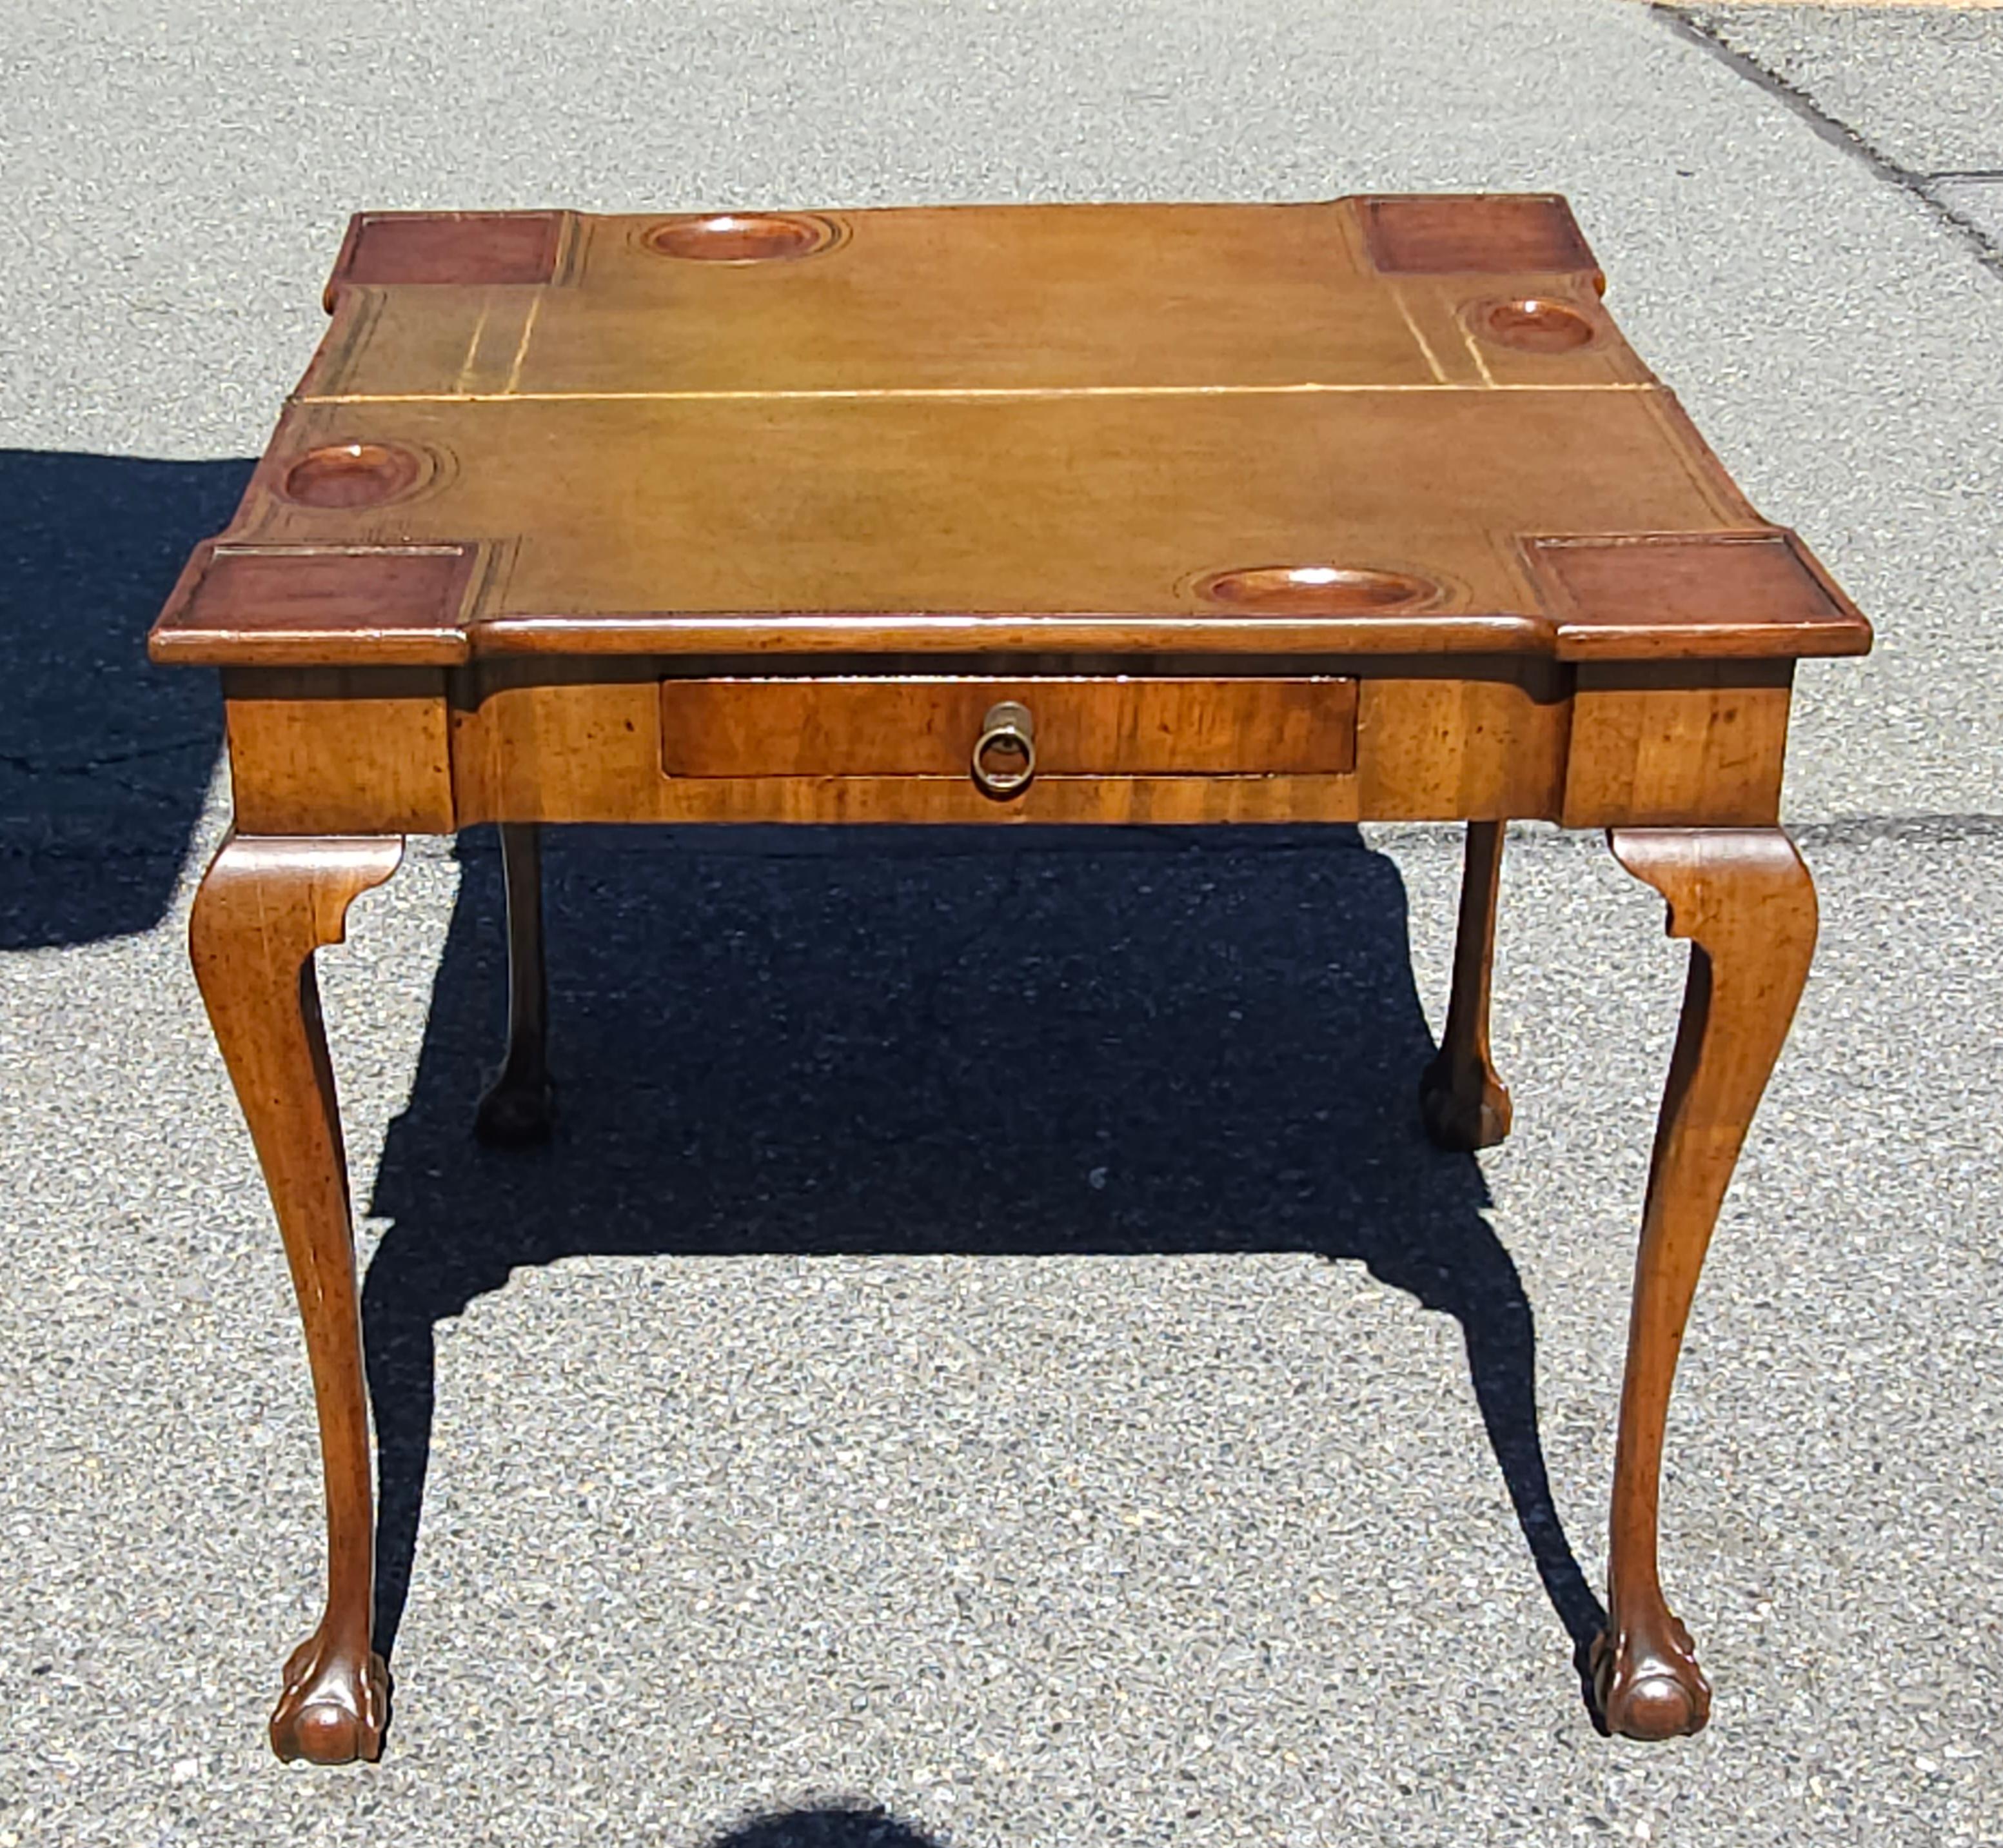 An 18th Century Chippendale Mahogany and Tooled Leather Fold Top Games Table  / console table with satinwood inlay, cabriole legs terminating with  ball and claw feet.
Measure 33